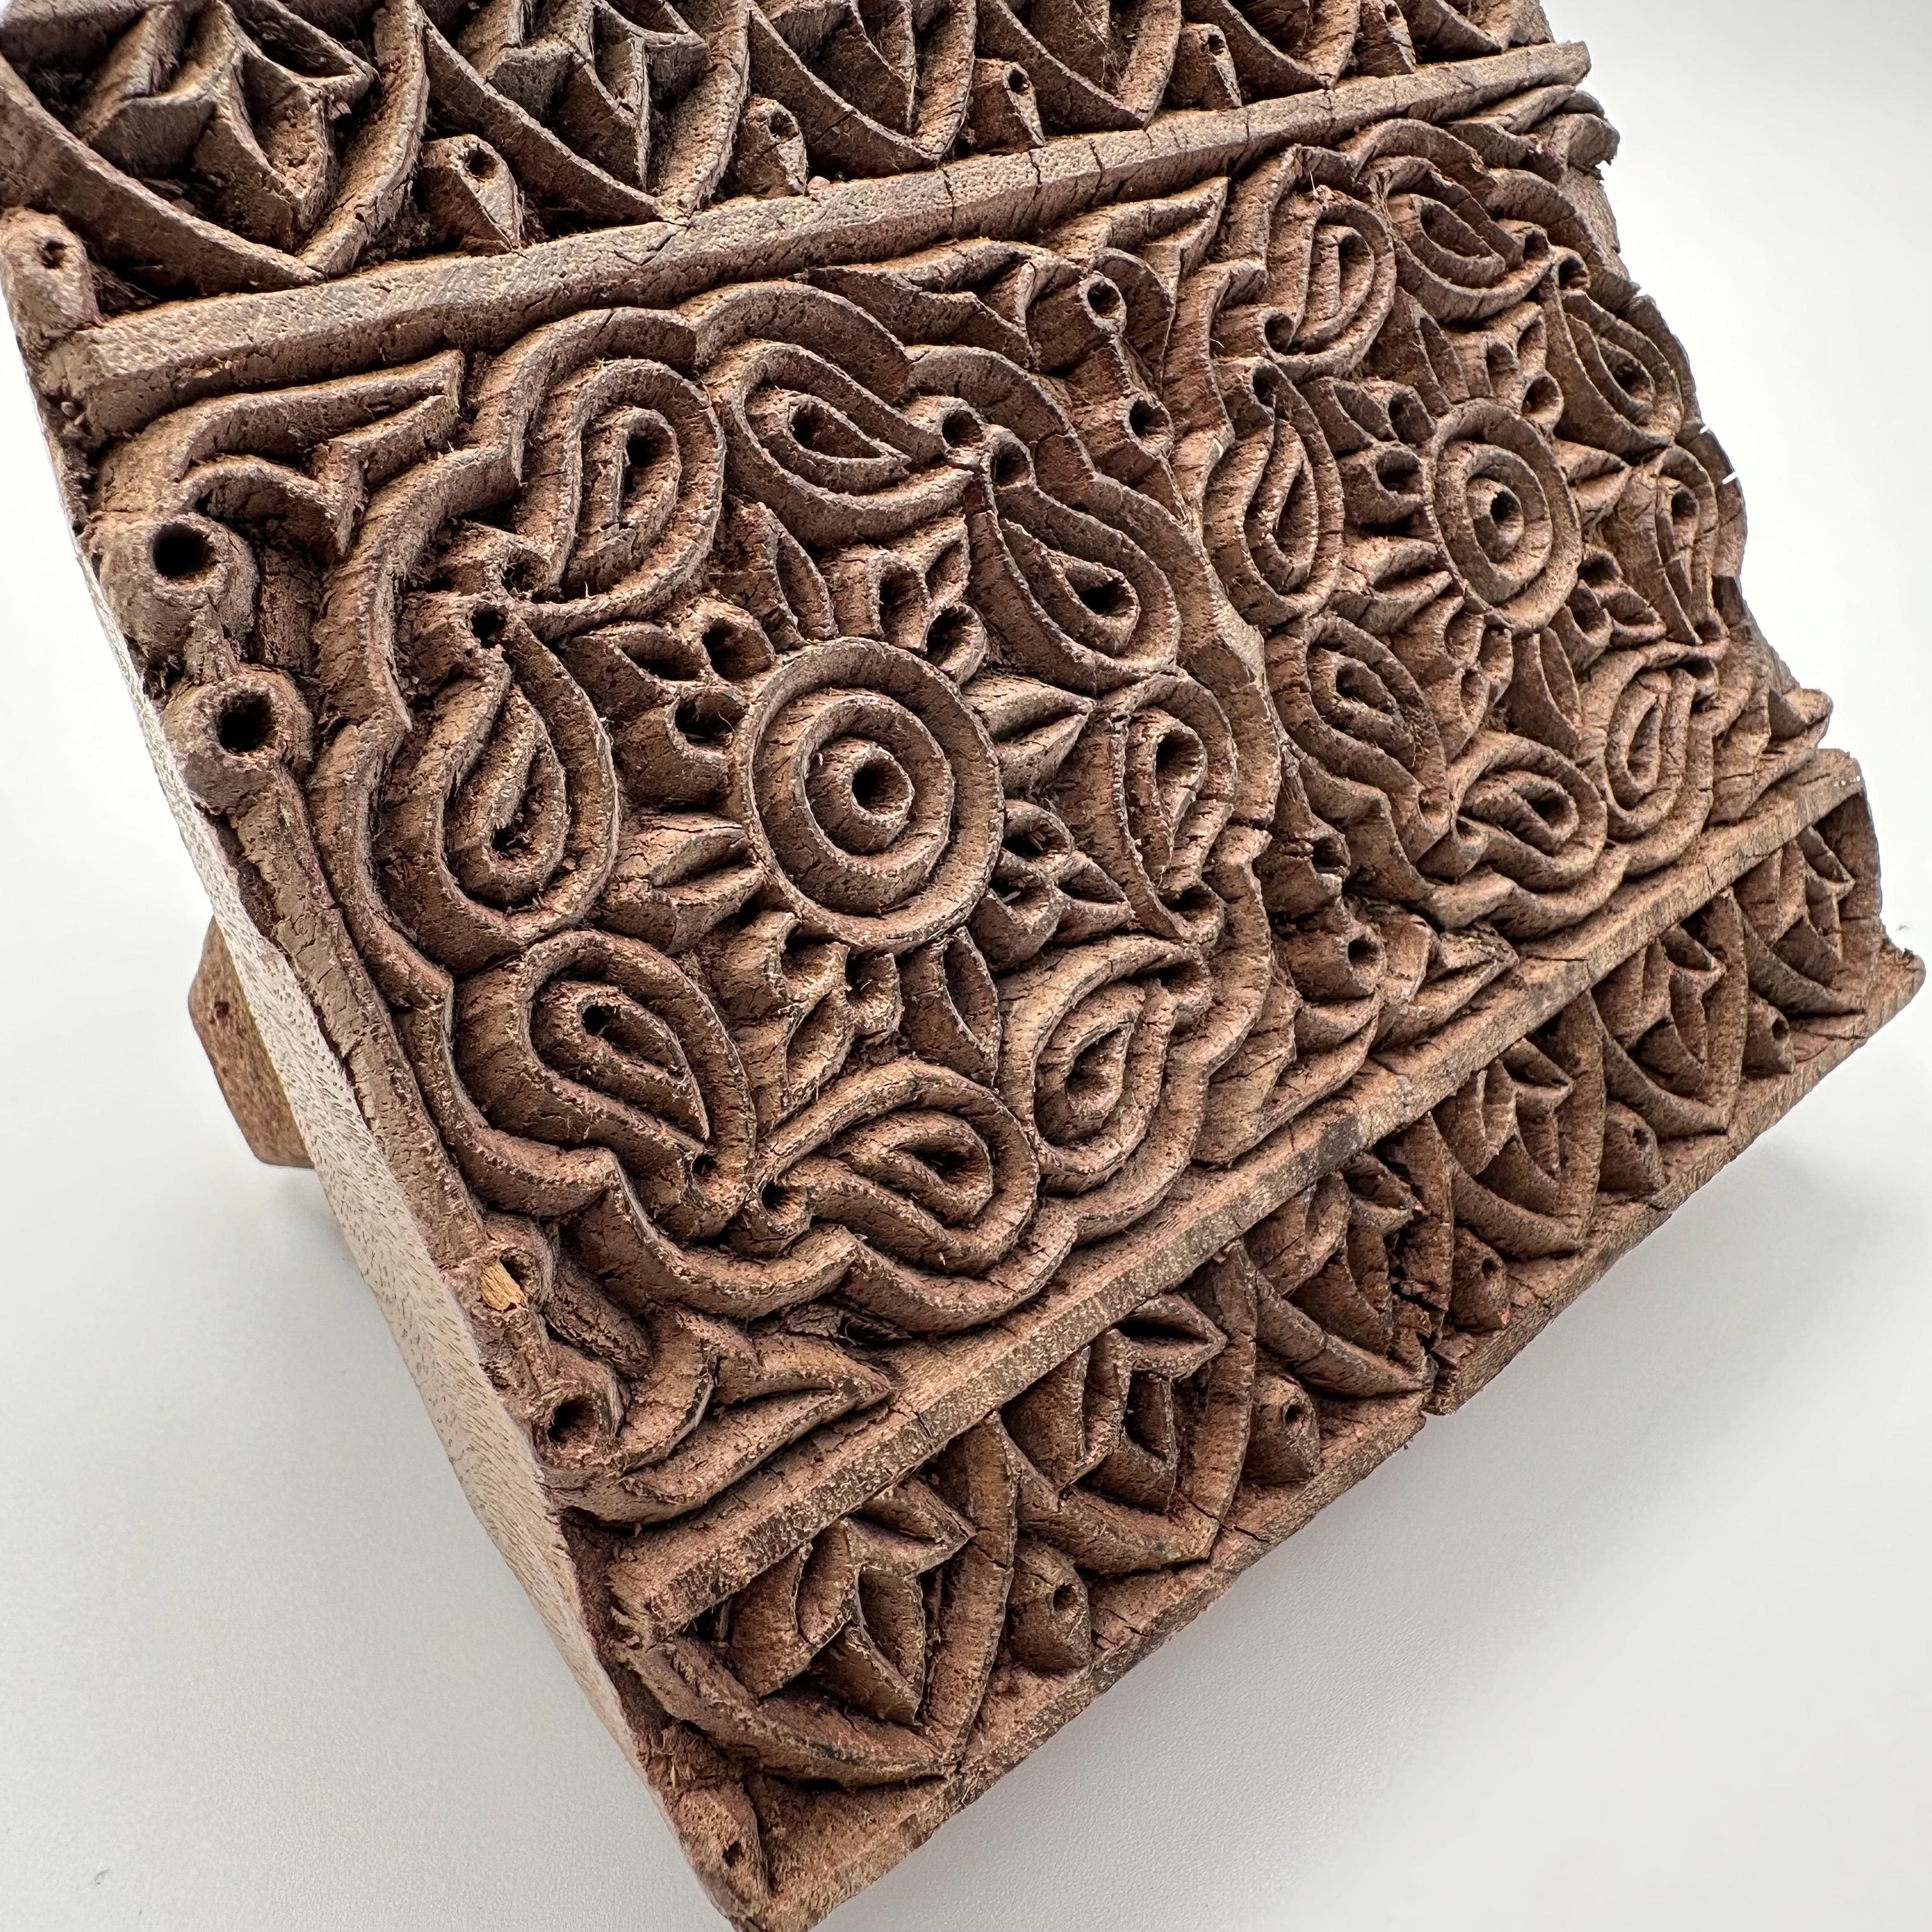 Antique Hand Carved Wood Printing Block with Large Rosettes For Sale 3